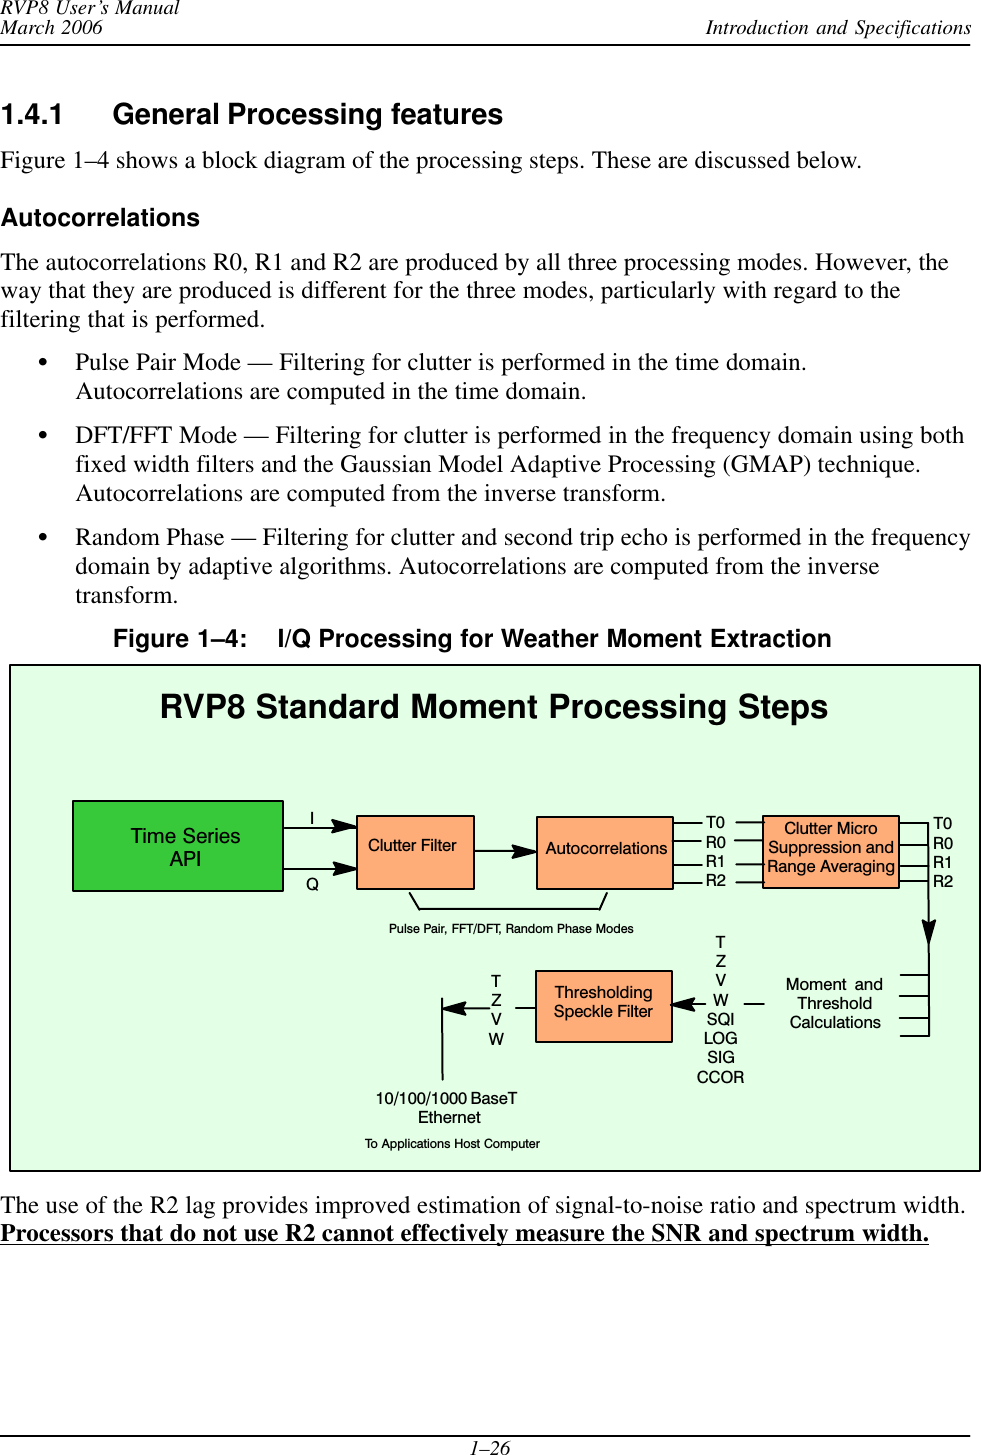 Introduction and SpecificationsRVP8 User’s ManualMarch 20061–261.4.1 General Processing featuresFigure 1–4 shows a block diagram of the processing steps. These are discussed below.AutocorrelationsThe autocorrelations R0, R1 and R2 are produced by all three processing modes. However, theway that they are produced is different for the three modes, particularly with regard to thefiltering that is performed.SPulse Pair Mode — Filtering for clutter is performed in the time domain.Autocorrelations are computed in the time domain.SDFT/FFT Mode — Filtering for clutter is performed in the frequency domain using bothfixed width filters and the Gaussian Model Adaptive Processing (GMAP) technique.Autocorrelations are computed from the inverse transform.SRandom Phase — Filtering for clutter and second trip echo is performed in the frequencydomain by adaptive algorithms. Autocorrelations are computed from the inversetransform.Figure 1–4: I/Q Processing for Weather Moment Extraction Moment  andThresholdCalculationsClutter FilterIQAutocorrelationsRVP8 Standard Moment Processing StepsClutter MicroSuppression andRange AveragingThresholdingSpeckle FilterTZVWSQILOGSIGCCORT0R0R1R2T0R0R1R2TZVWPulse Pair, FFT/DFT, Random Phase Modes10/100/1000 BaseT EthernetTo Applications Host ComputerTime SeriesAPIThe use of the R2 lag provides improved estimation of signal-to-noise ratio and spectrum width.Processors that do not use R2 cannot effectively measure the SNR and spectrum width.